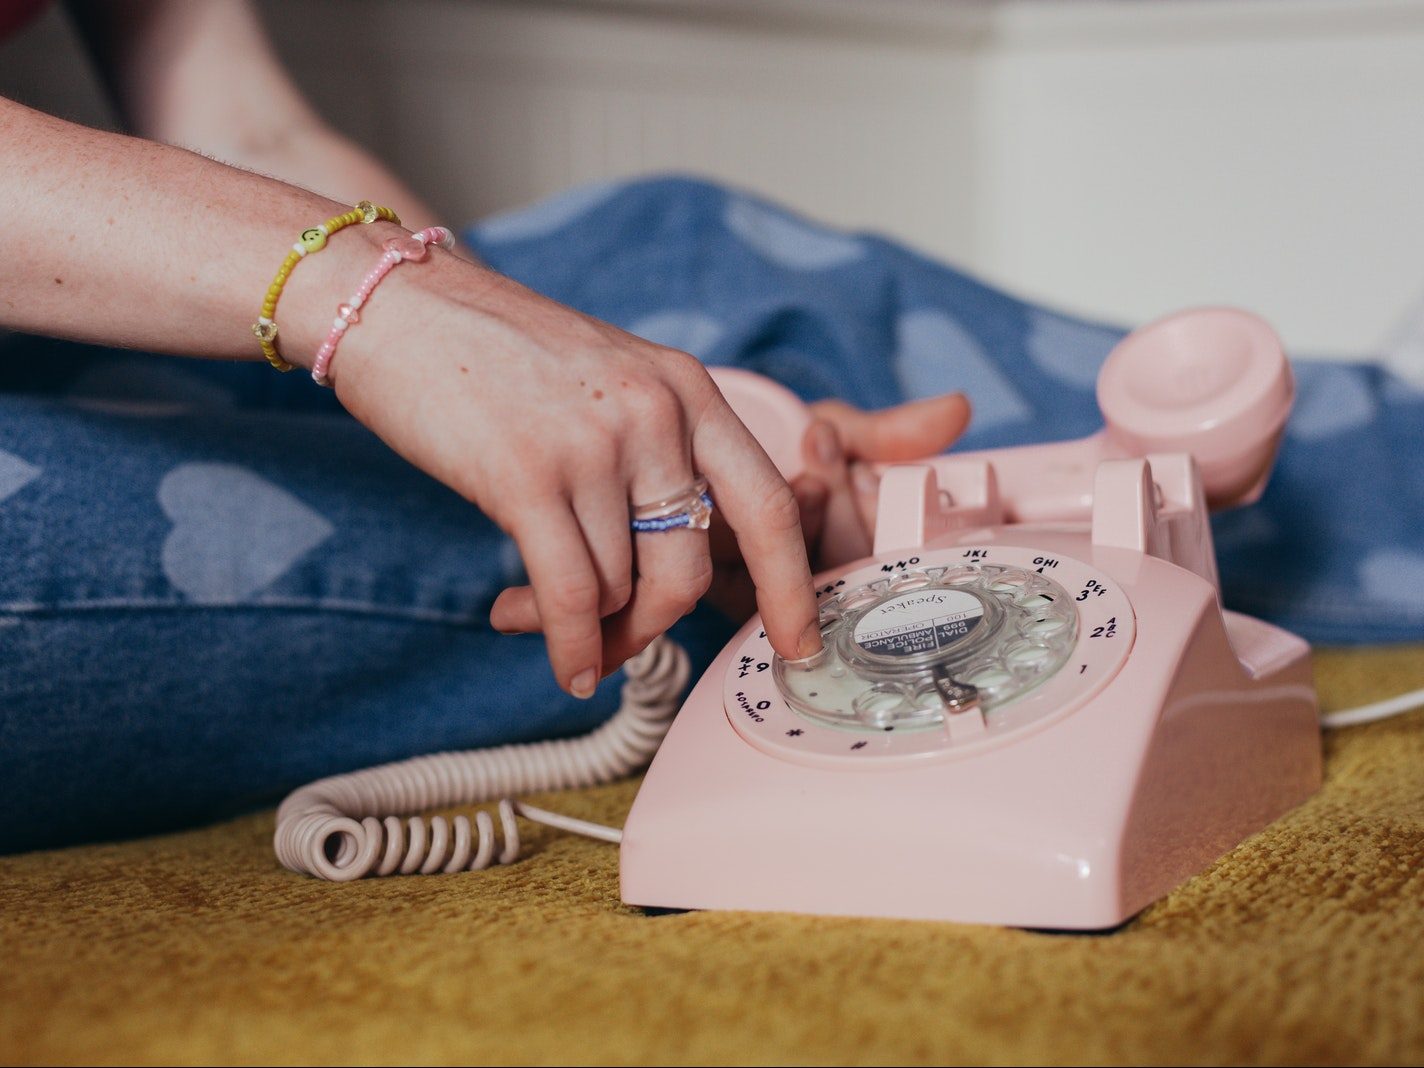 Close-Up Photo of a Person Using a Pink Rotary Phone